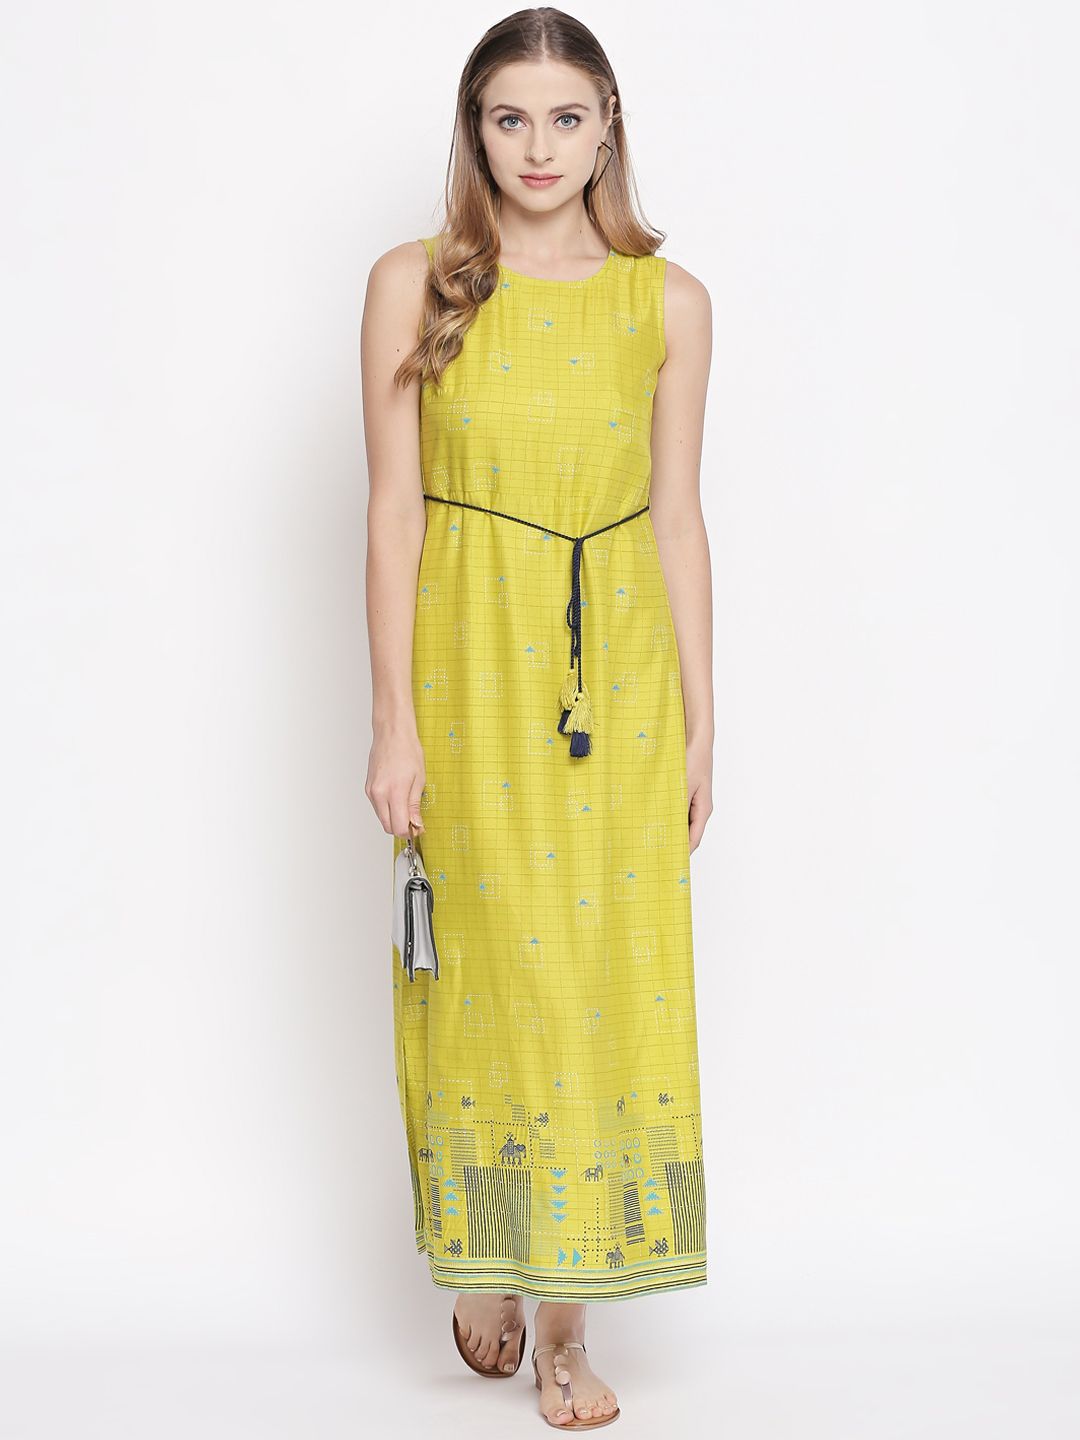 AKKRITI BY PANTALOONS Women Lime Green Checked Fit and Flare Dress Price in India